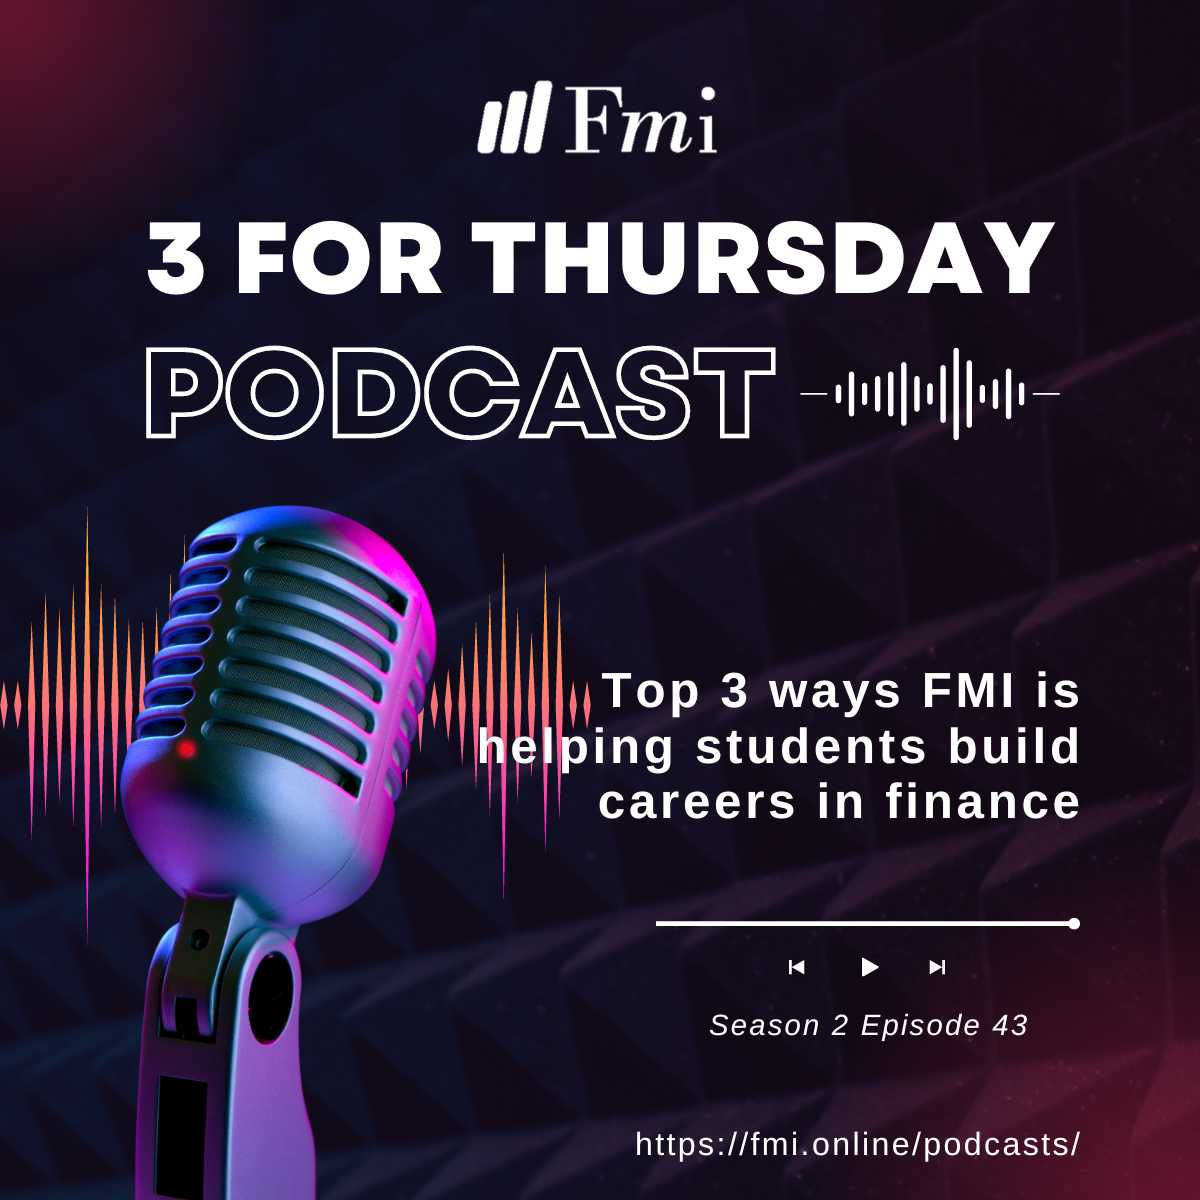 Top 3 ways FMI is helping students build careers in finance